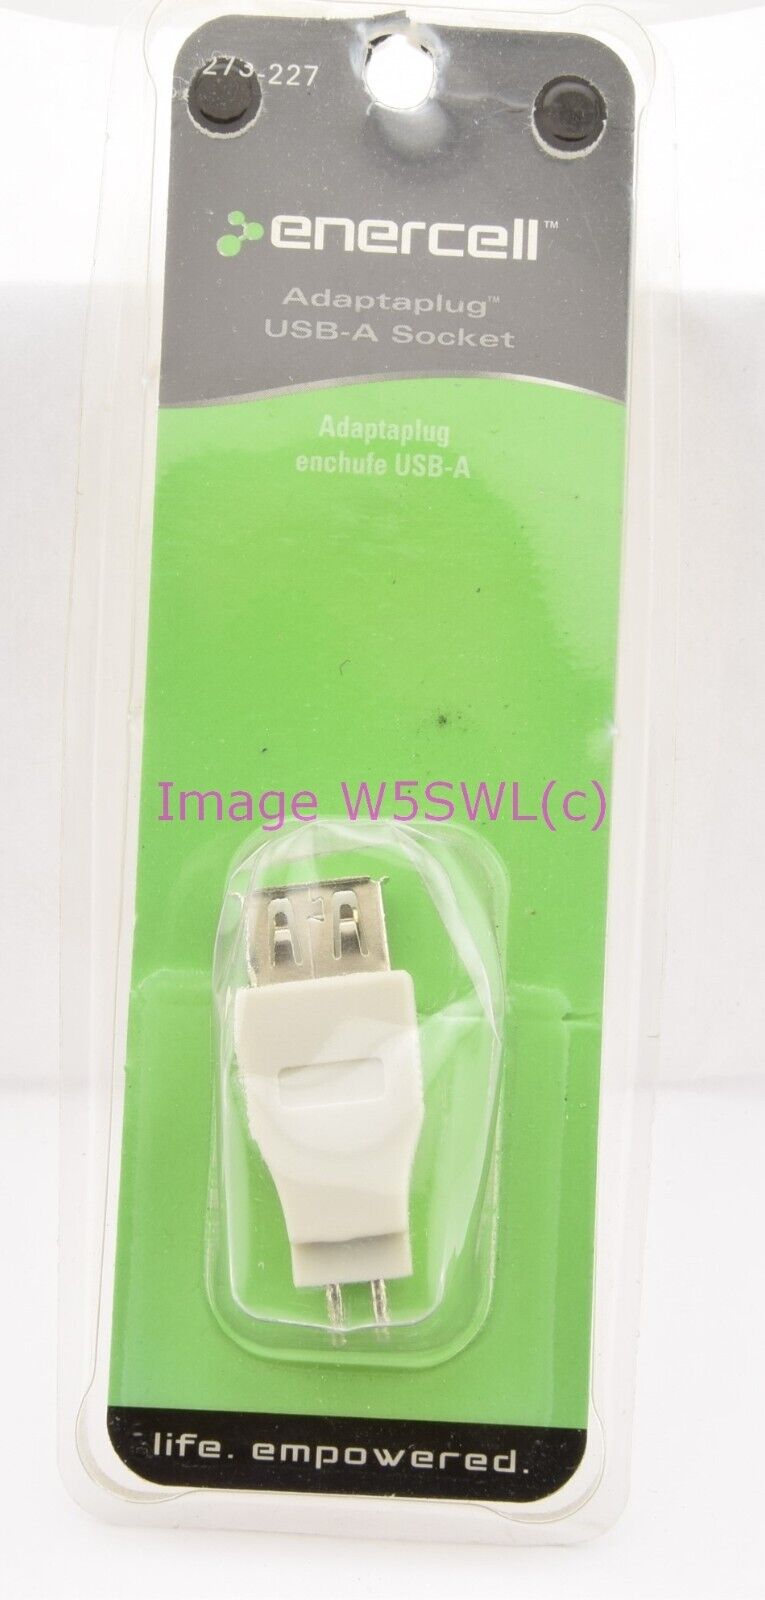 Enercell Adaptaplug USB-A 2730464 White - Dave's Hobby Shop by W5SWL